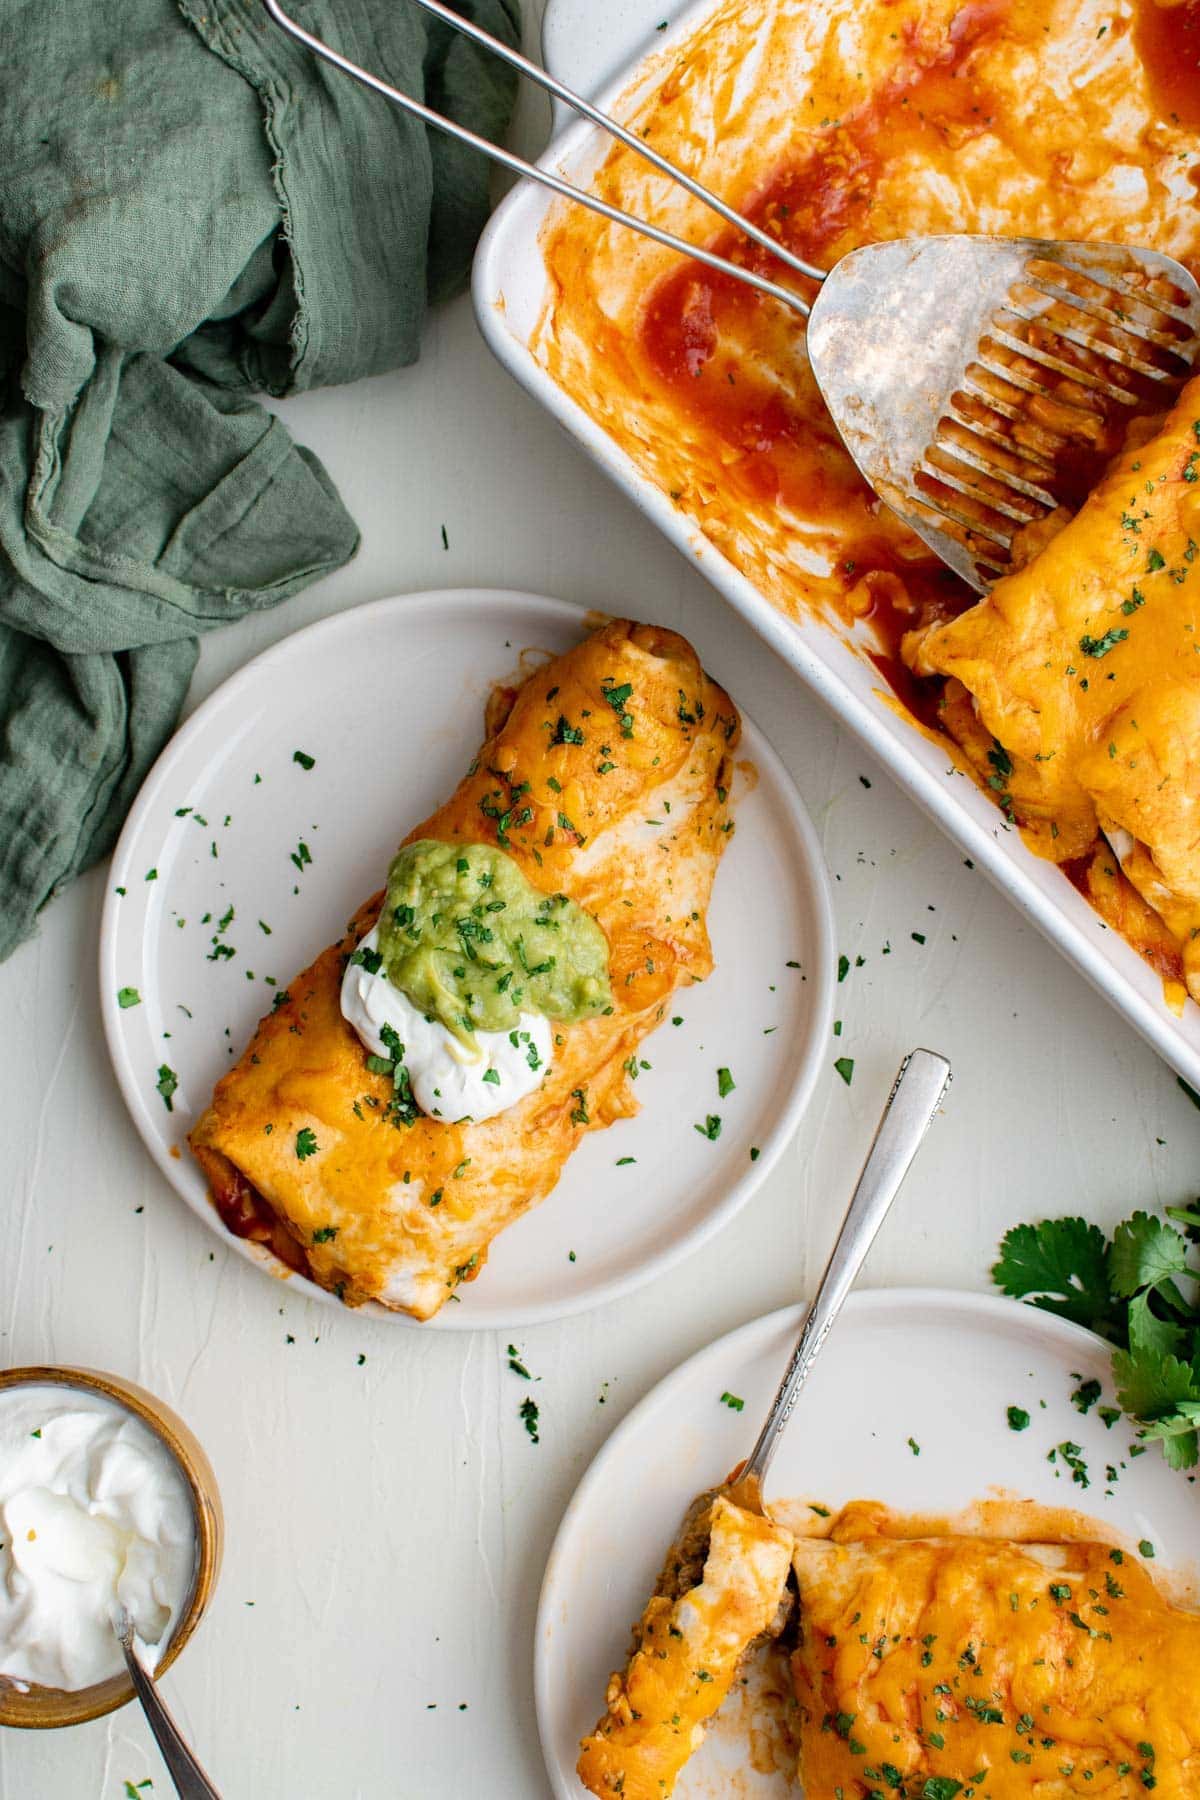 burrito topped with sour cream and guacamole on a white plate, surrounded by more burritos